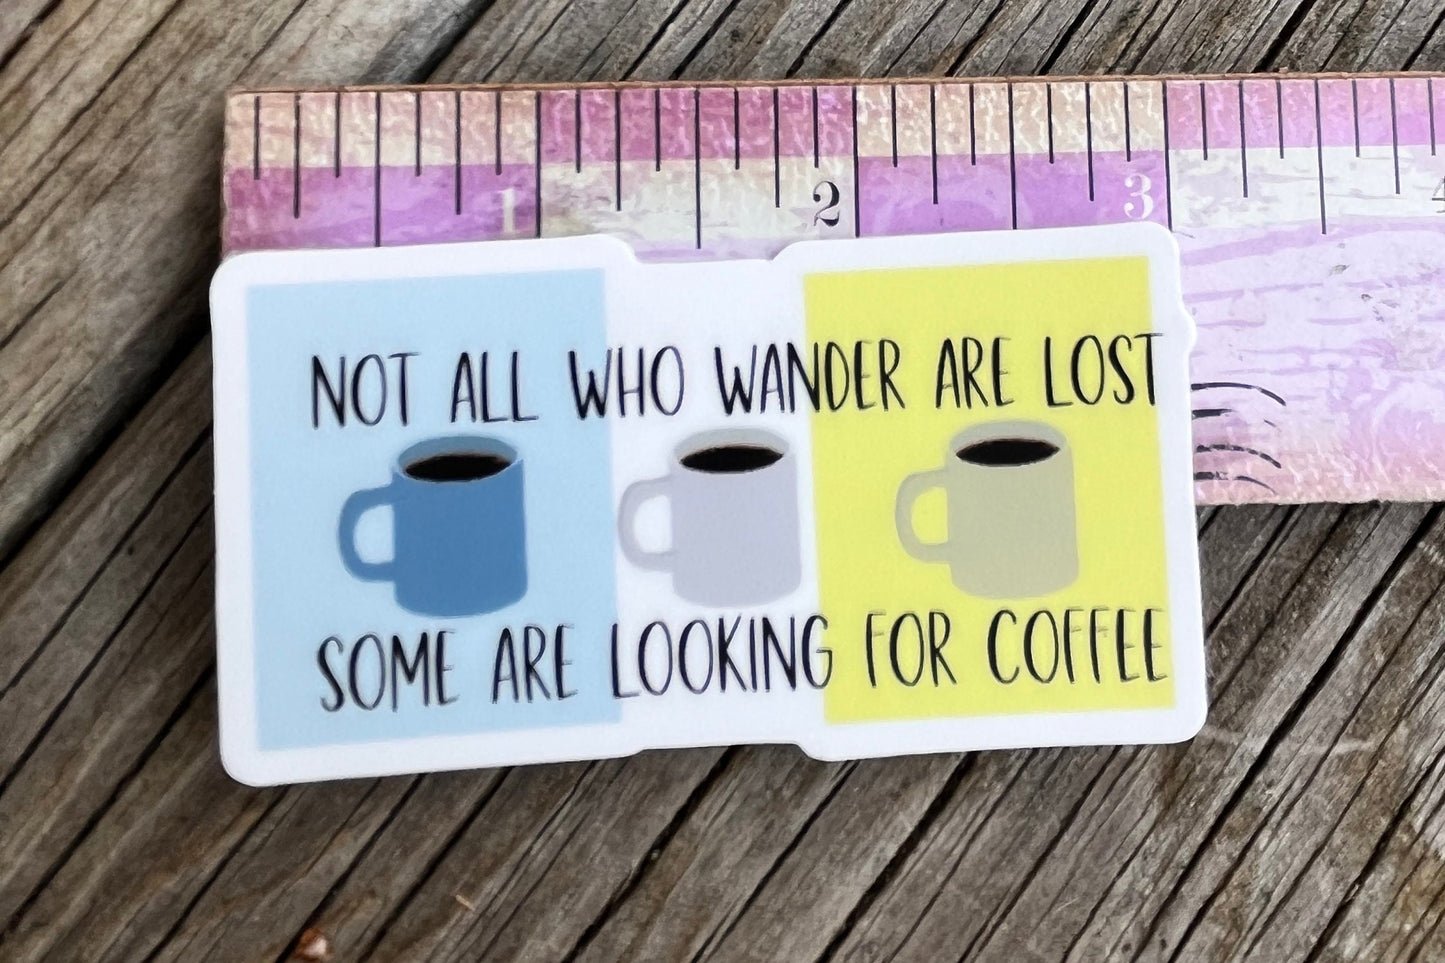 Coffee not all who wander sticker with color